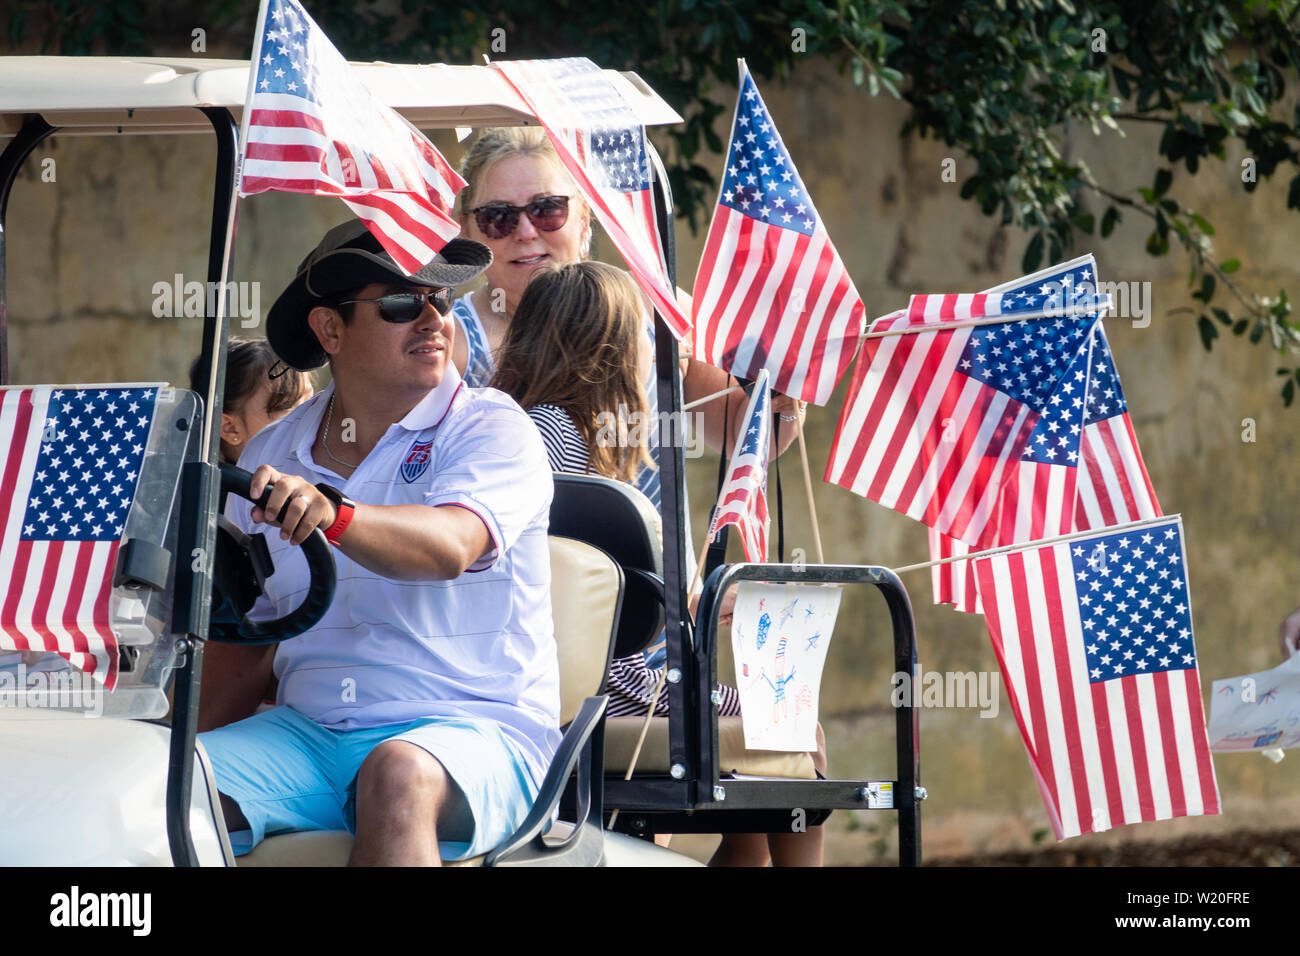 A golf cart float decorated with flags during the annual Independence Day golf cart and bicycle parade July 4, 2019 in Sullivan's Island, South Carolina. The tiny affluent Sea Island beach community across from Charleston holds an outsized golf cart parade featuring more than 75 decorated carts. Stock Photo